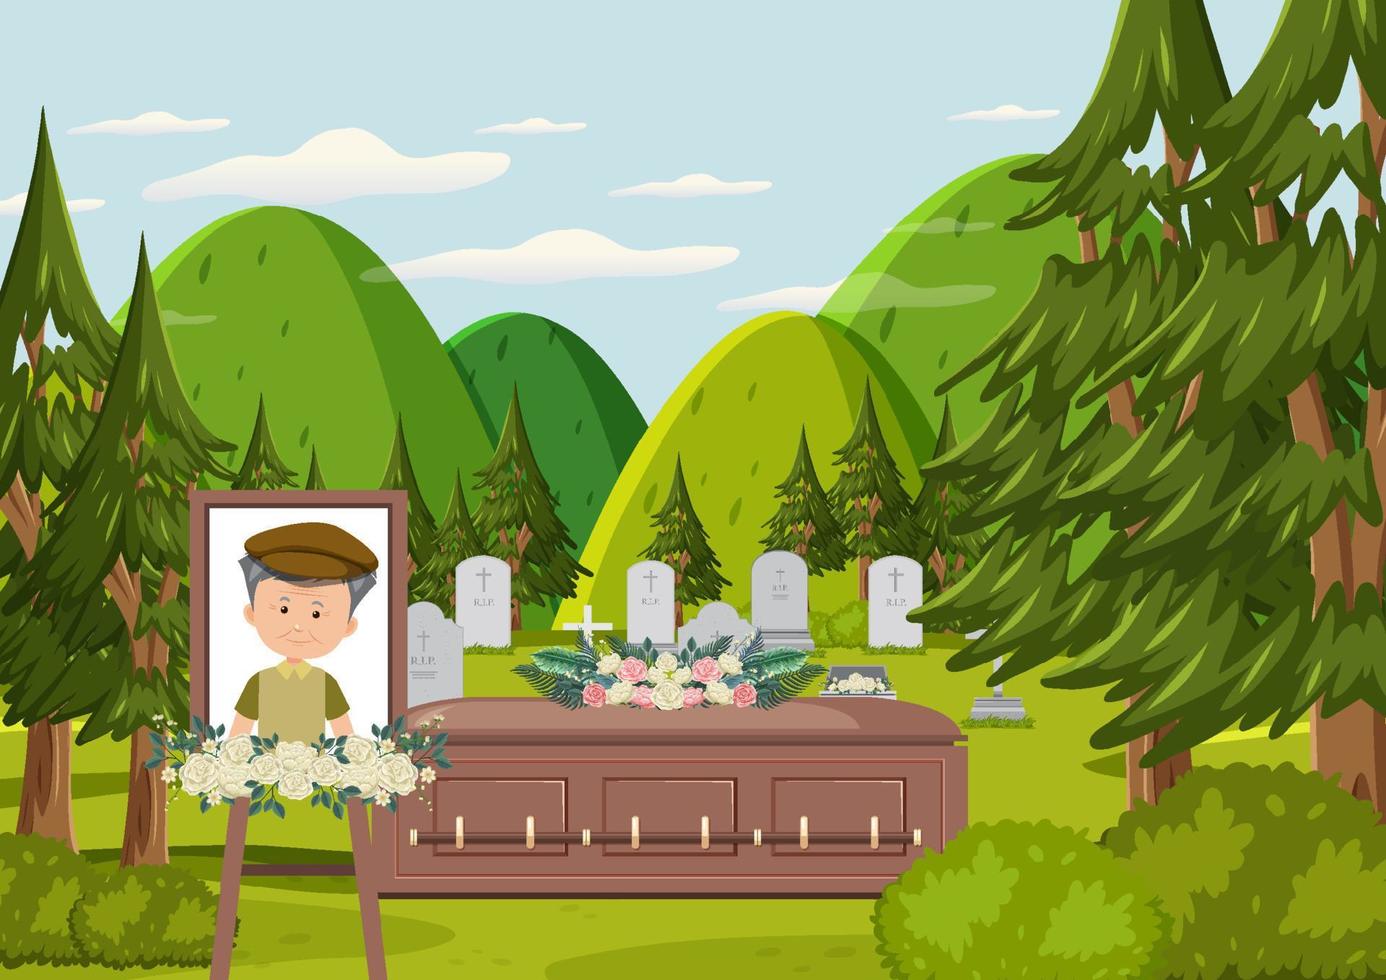 Coffin at funeral ceremony vector